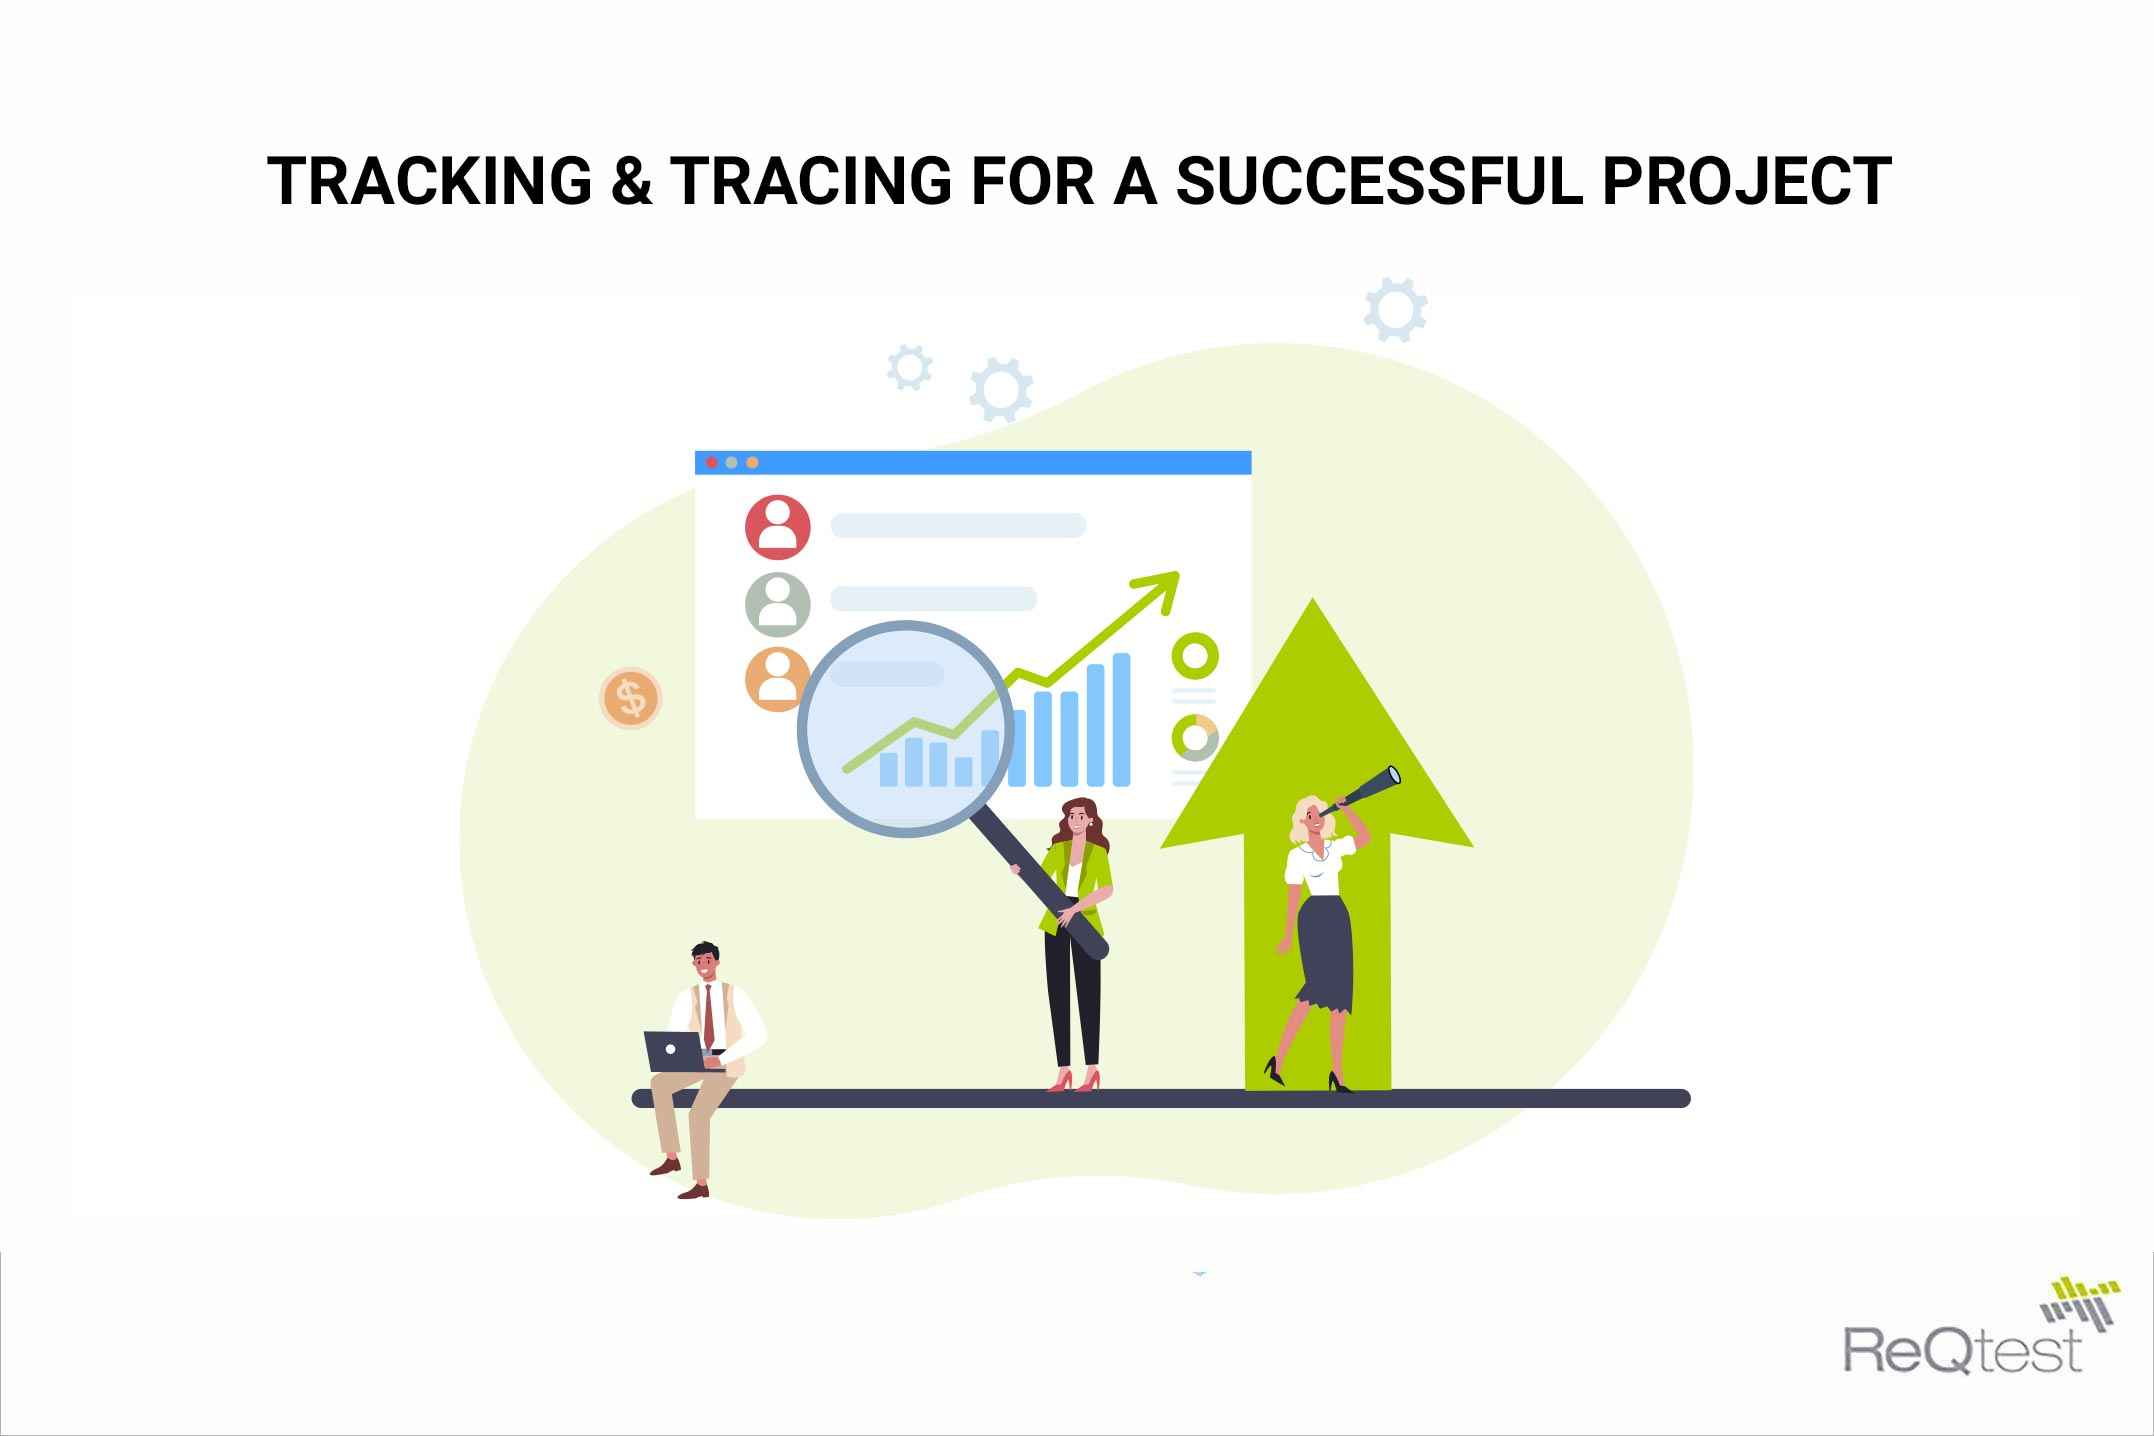 Tracking and tracing